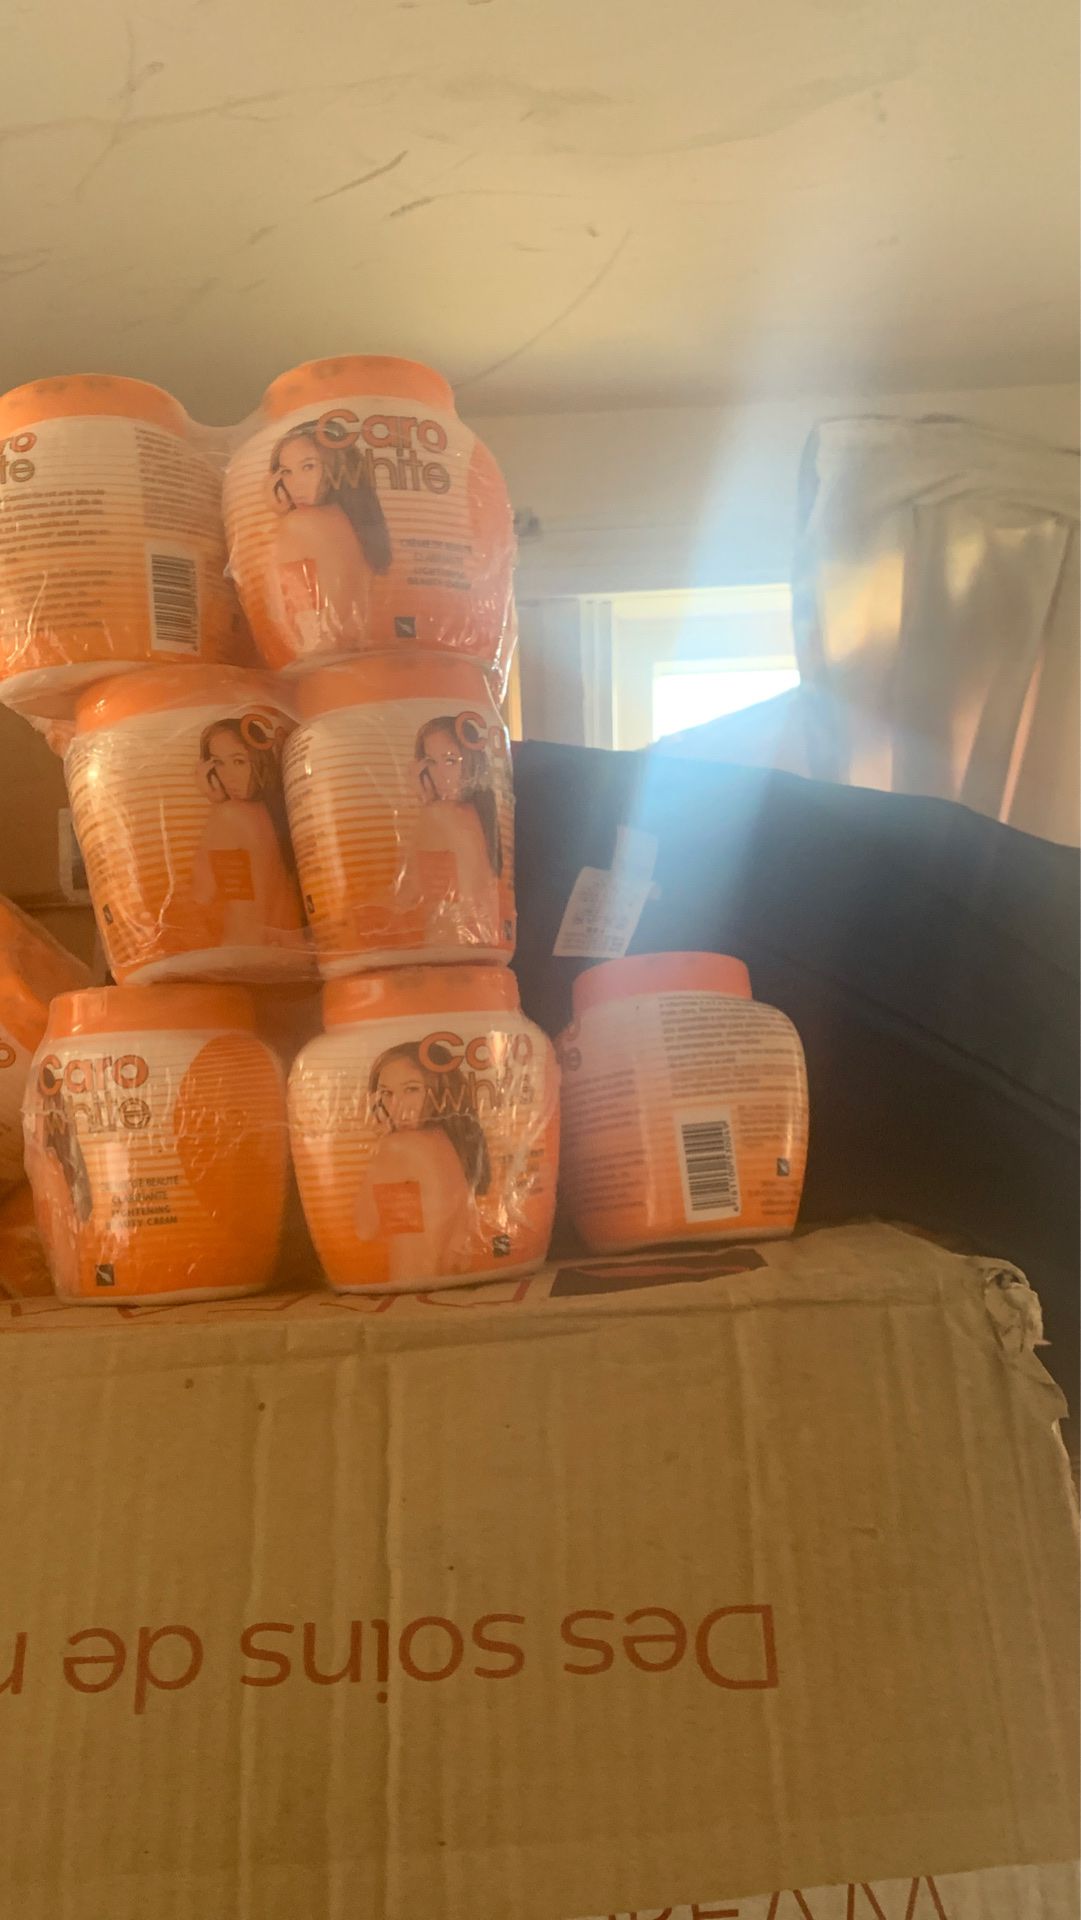 Bleaching cream and bleaching lotion boxes